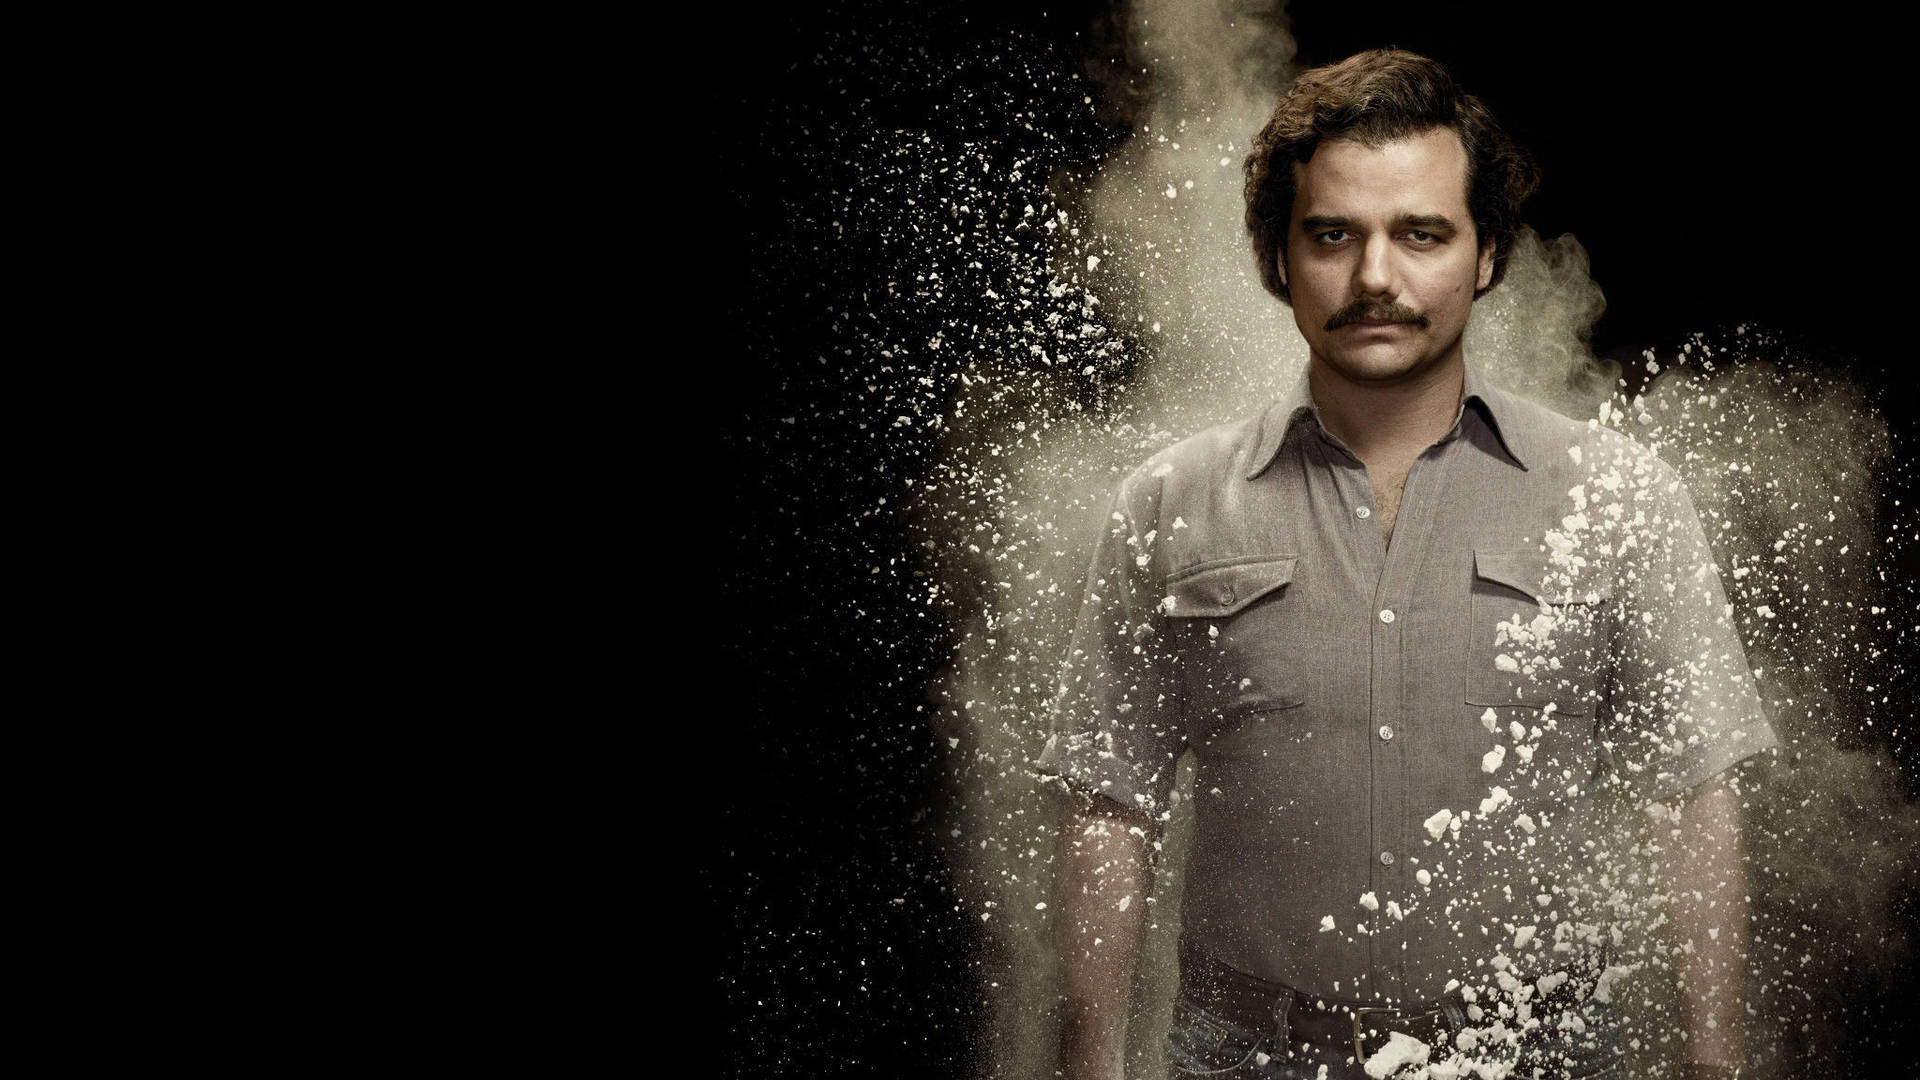 Narcos Lead Actor Wagner Moura Wallpaper